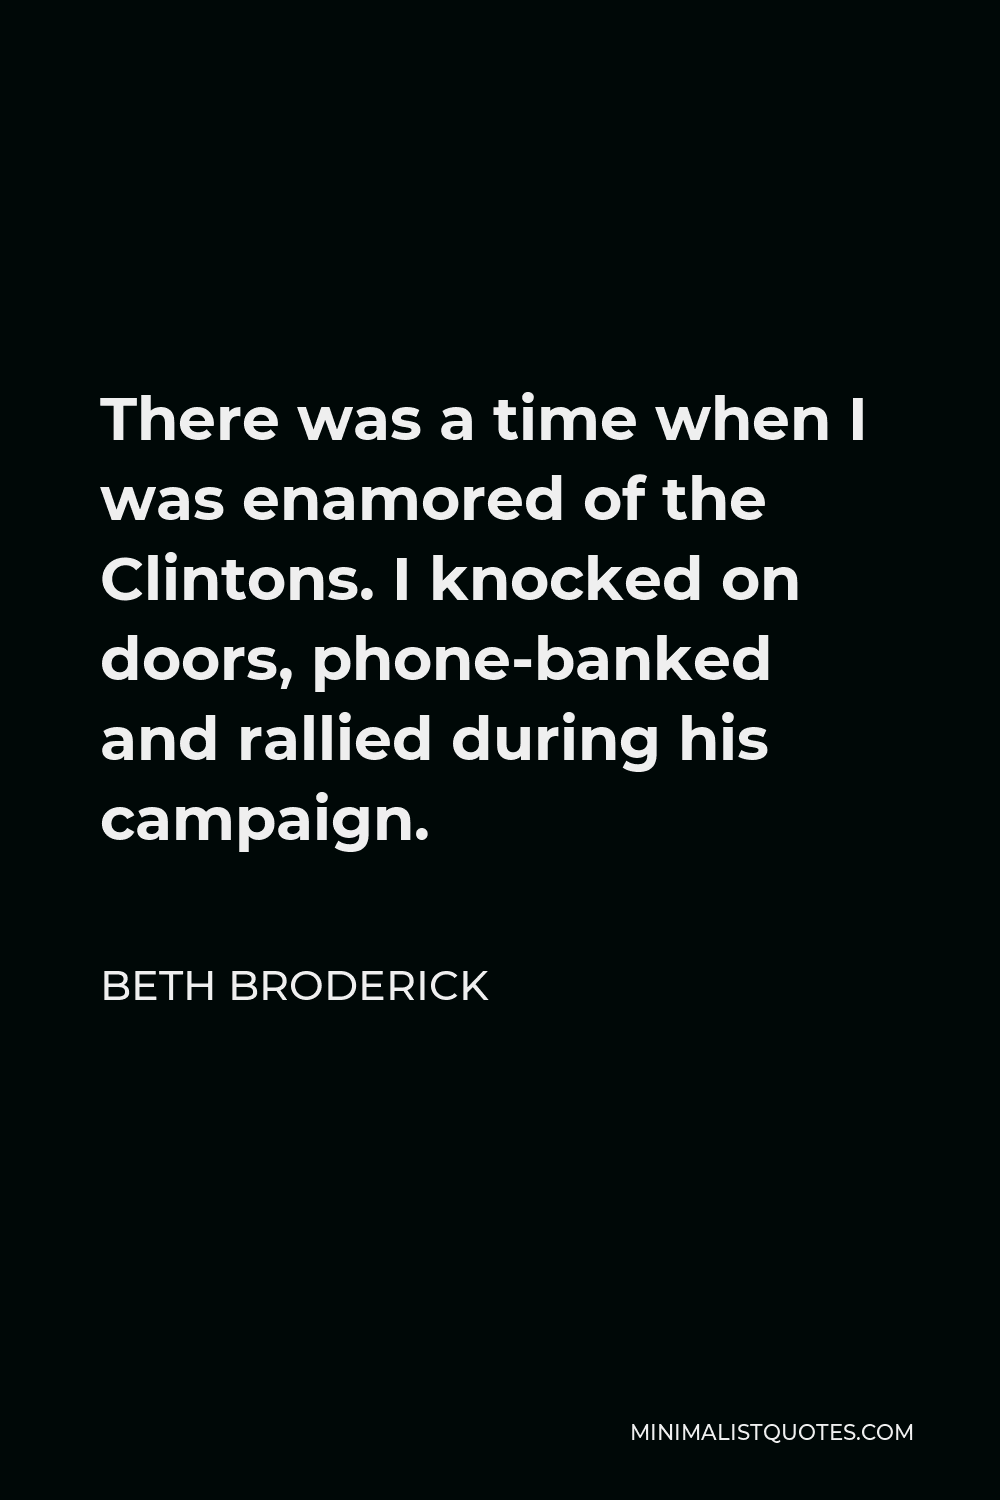 Beth Broderick Quote - There was a time when I was enamored of the Clintons. I knocked on doors, phone-banked and rallied during his campaign.